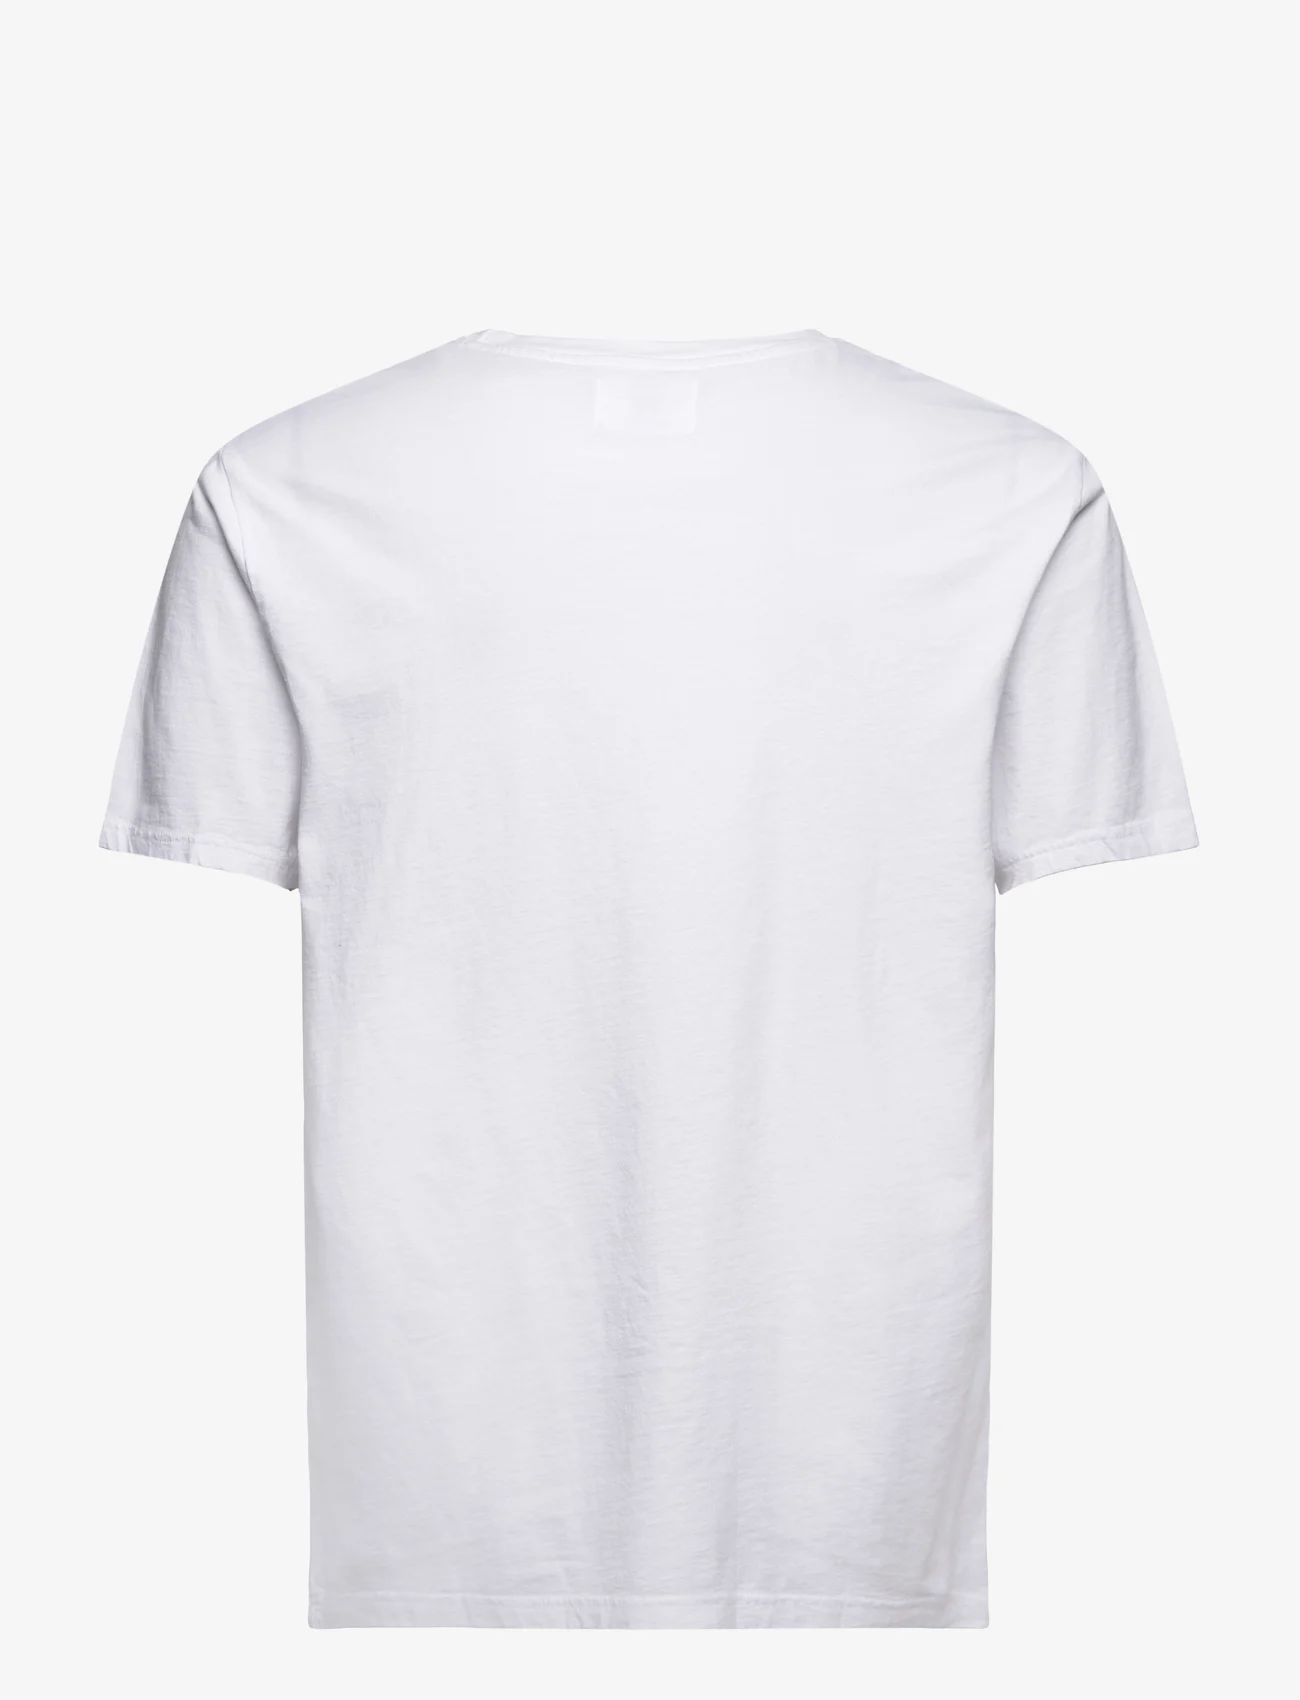 Double A by Wood Wood - Ace T-shirt - kortærmede - white/white - 1